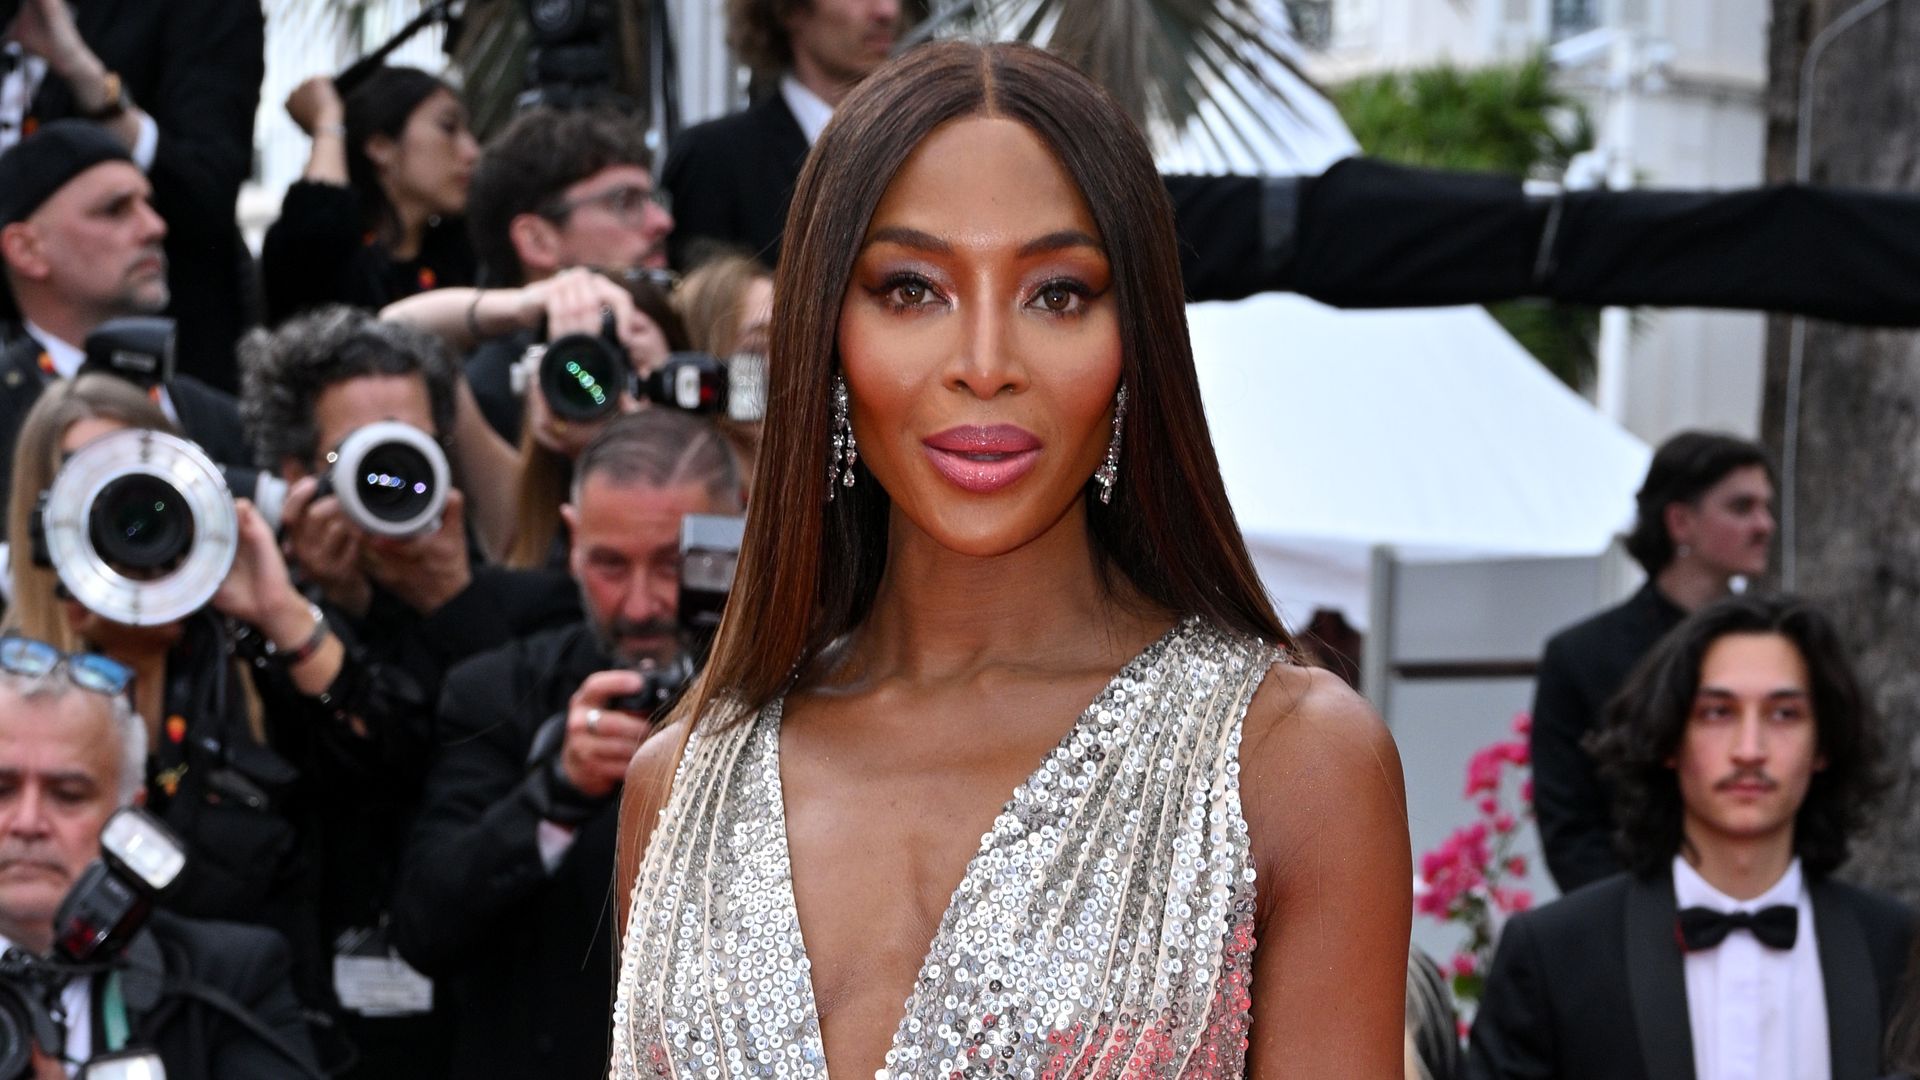 The supermodel attended the Jeanne du Barry Screening & opening ceremony red carpet at the 76th annual Cannes film festival at Palais des Festivals 